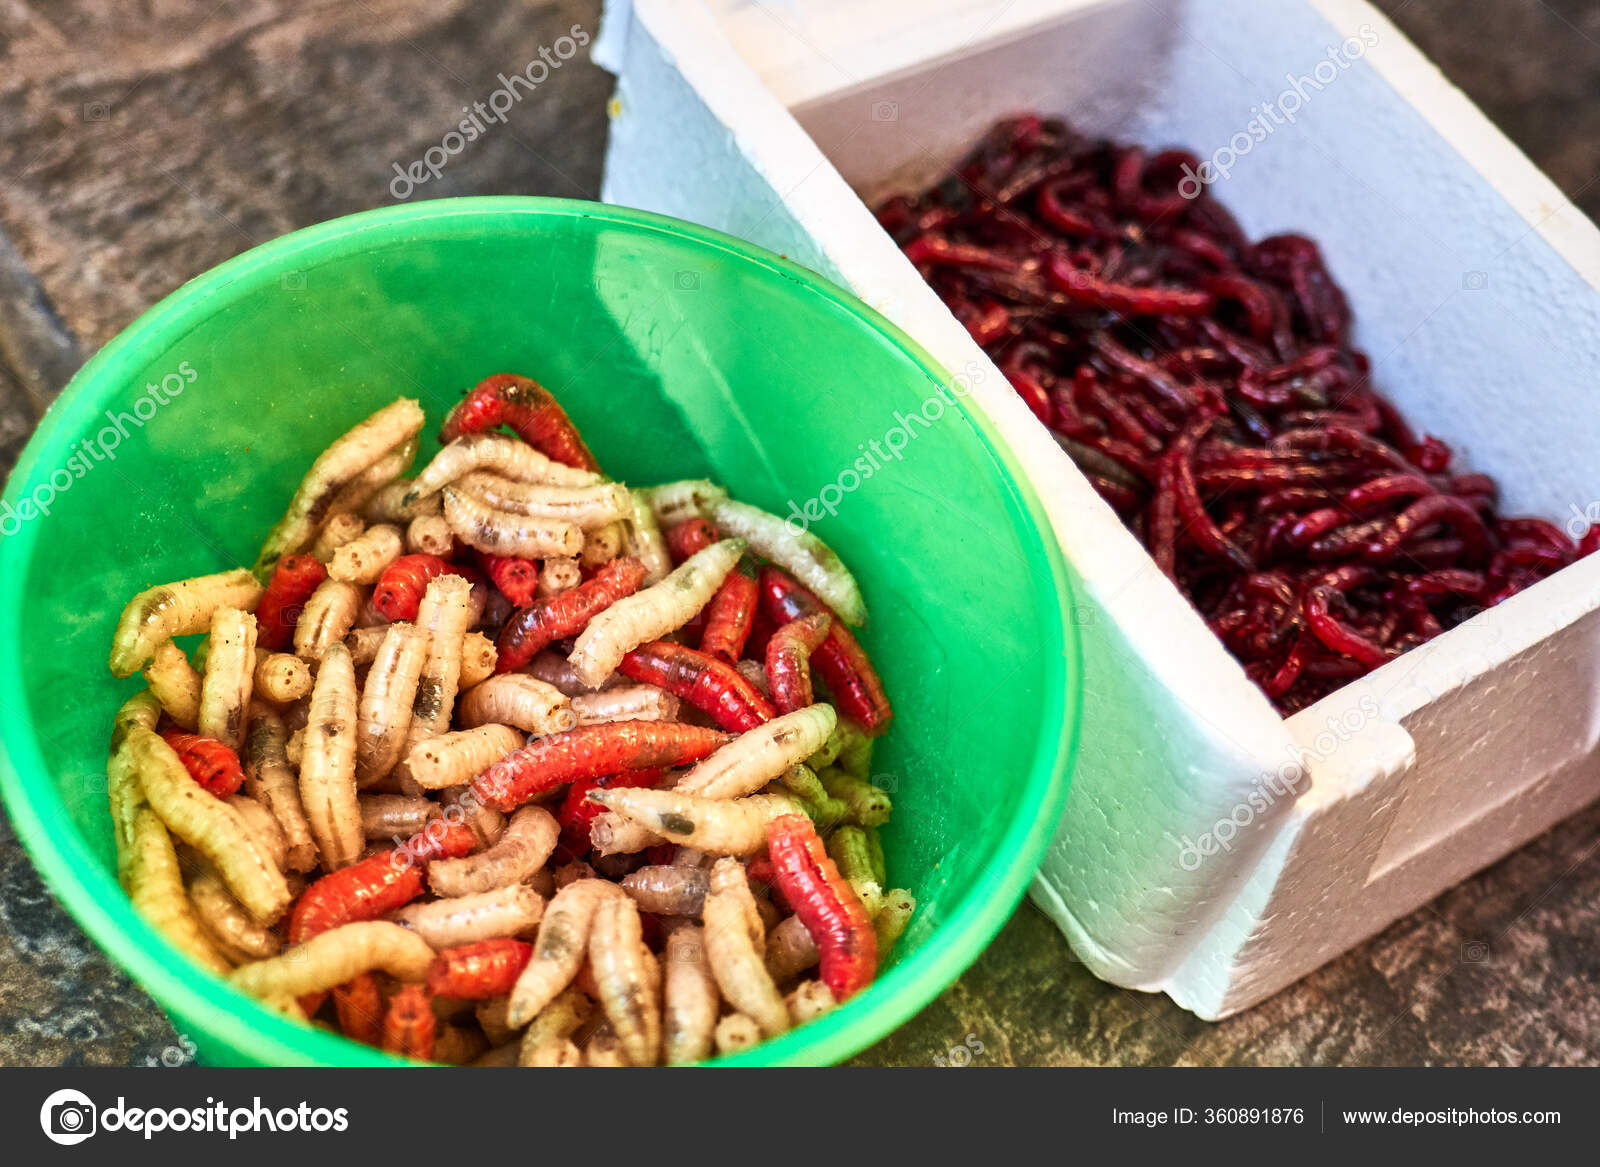 Bloodworms Maggots Fishing Container Stock Photo by ©NahomaLand 360891876